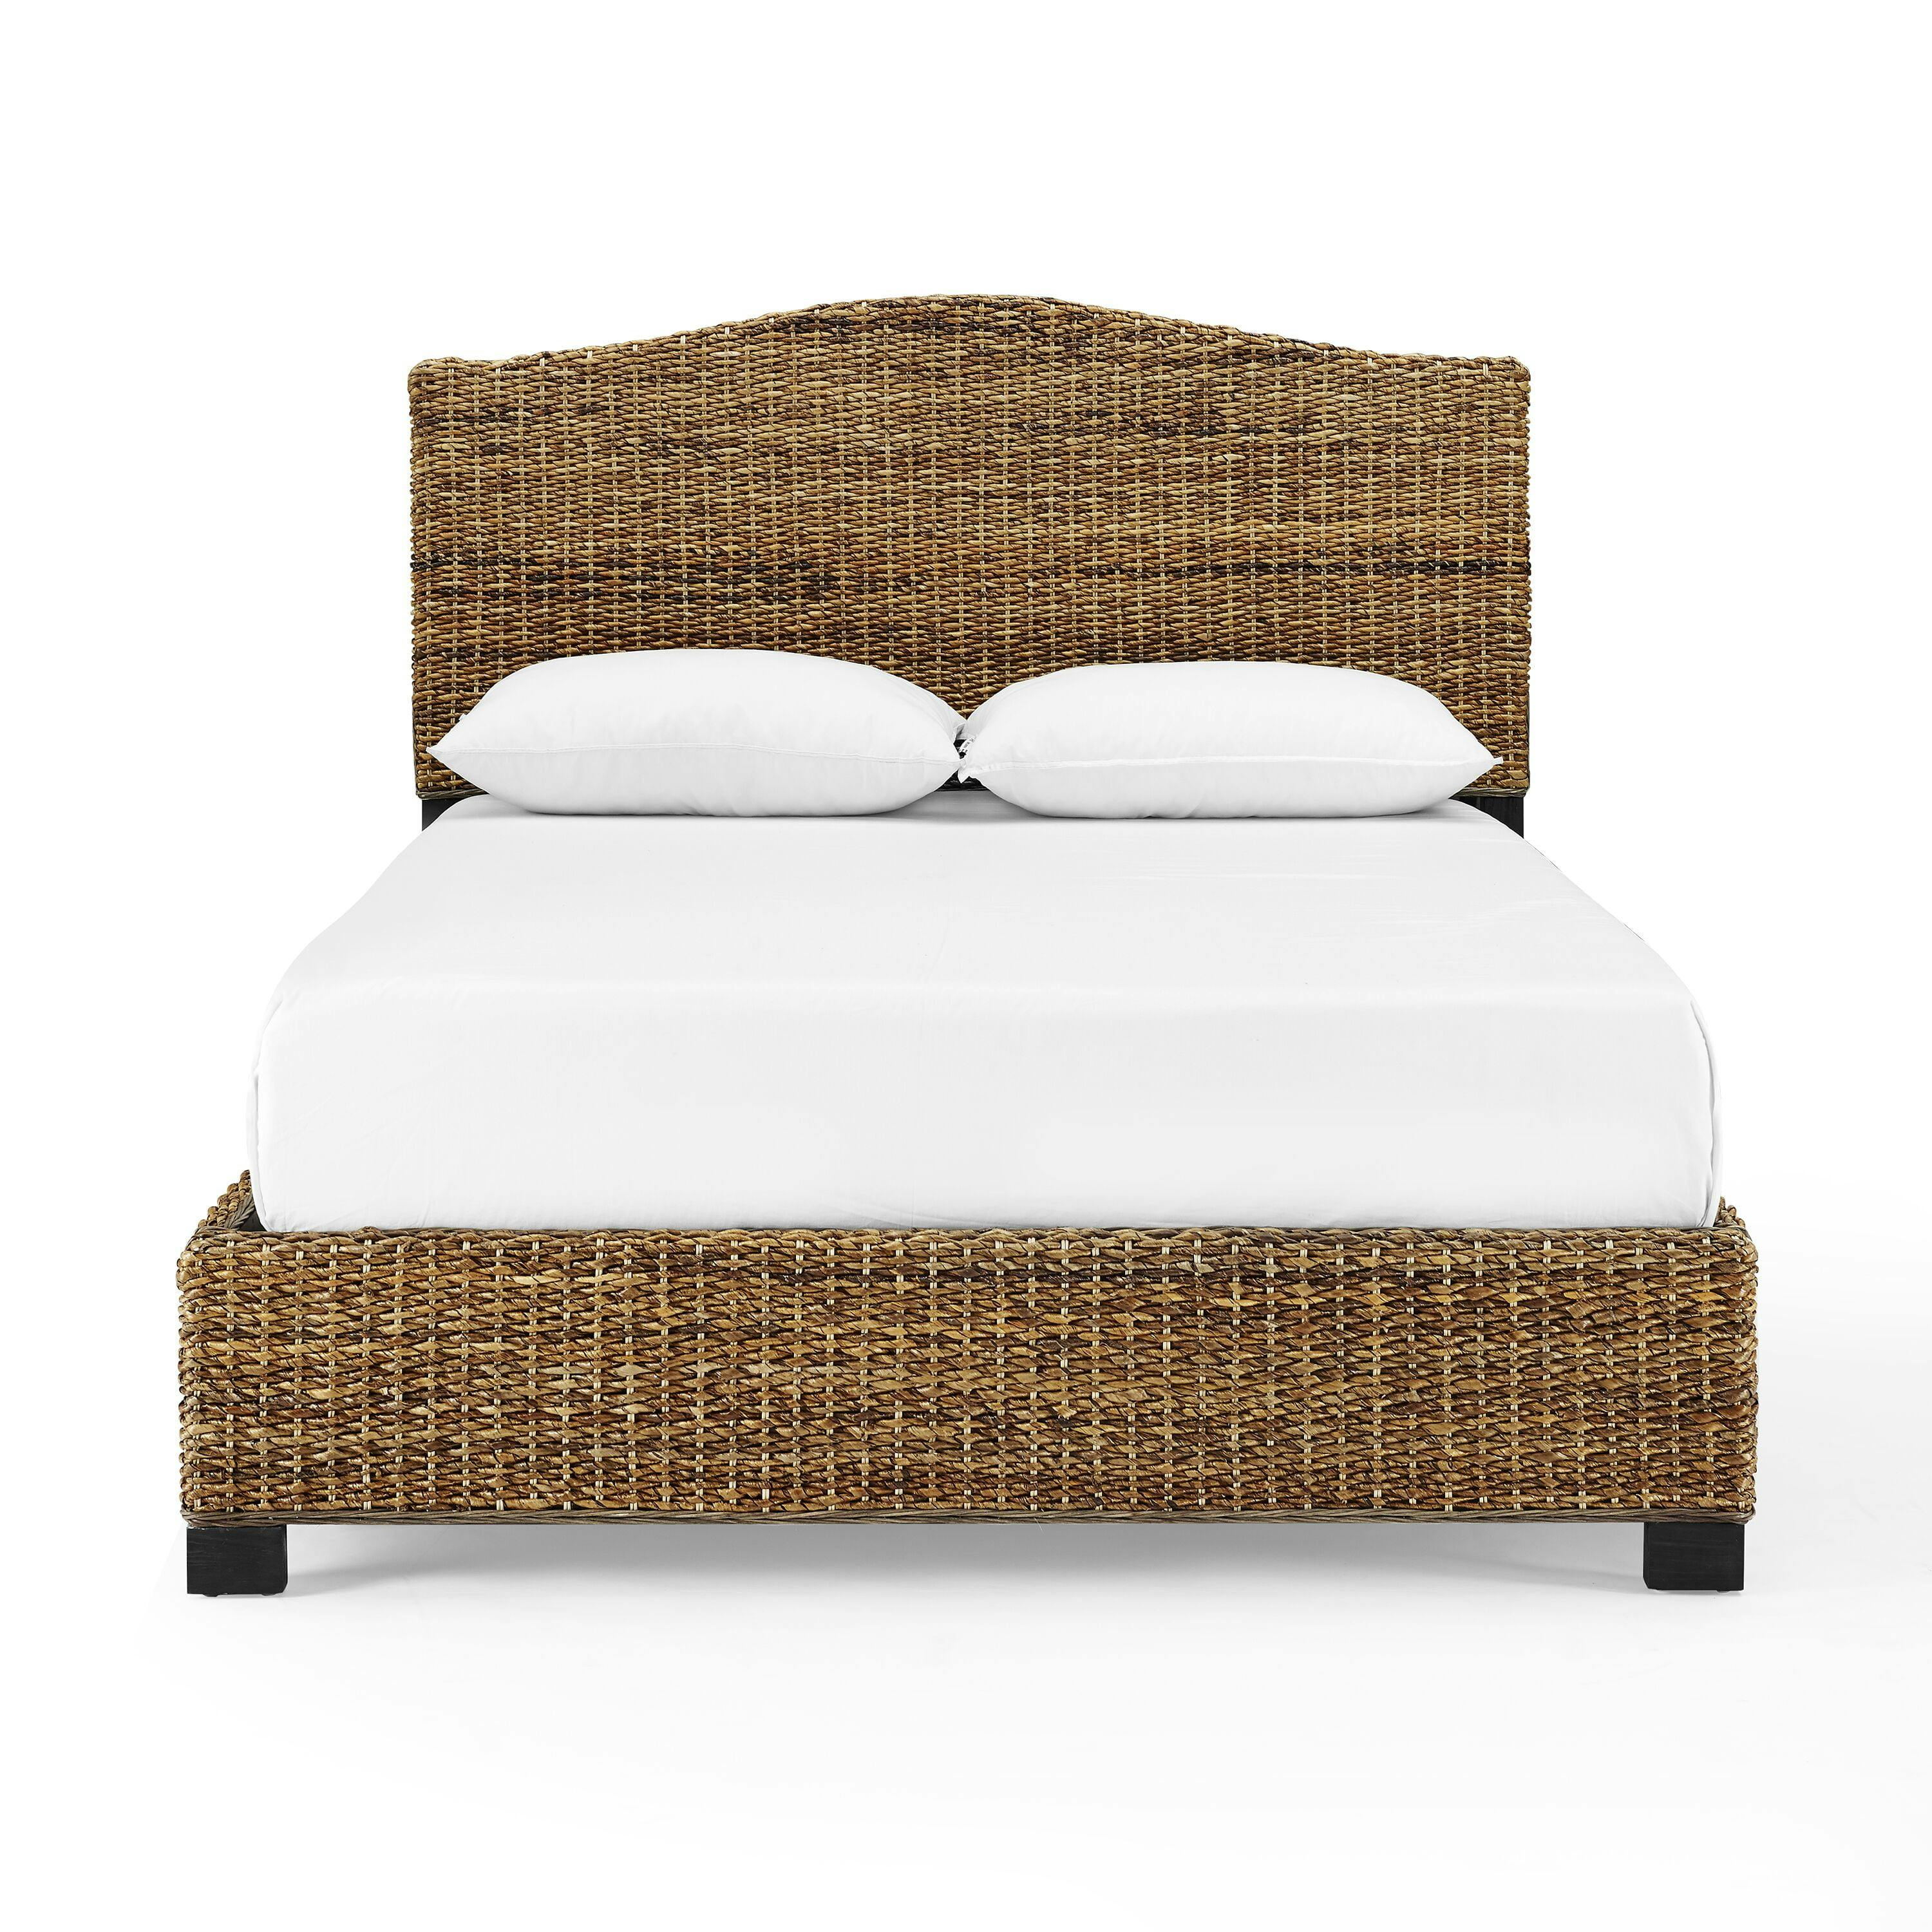 Serena Coastal Queen Bed with Natural Banana Leaf Weave